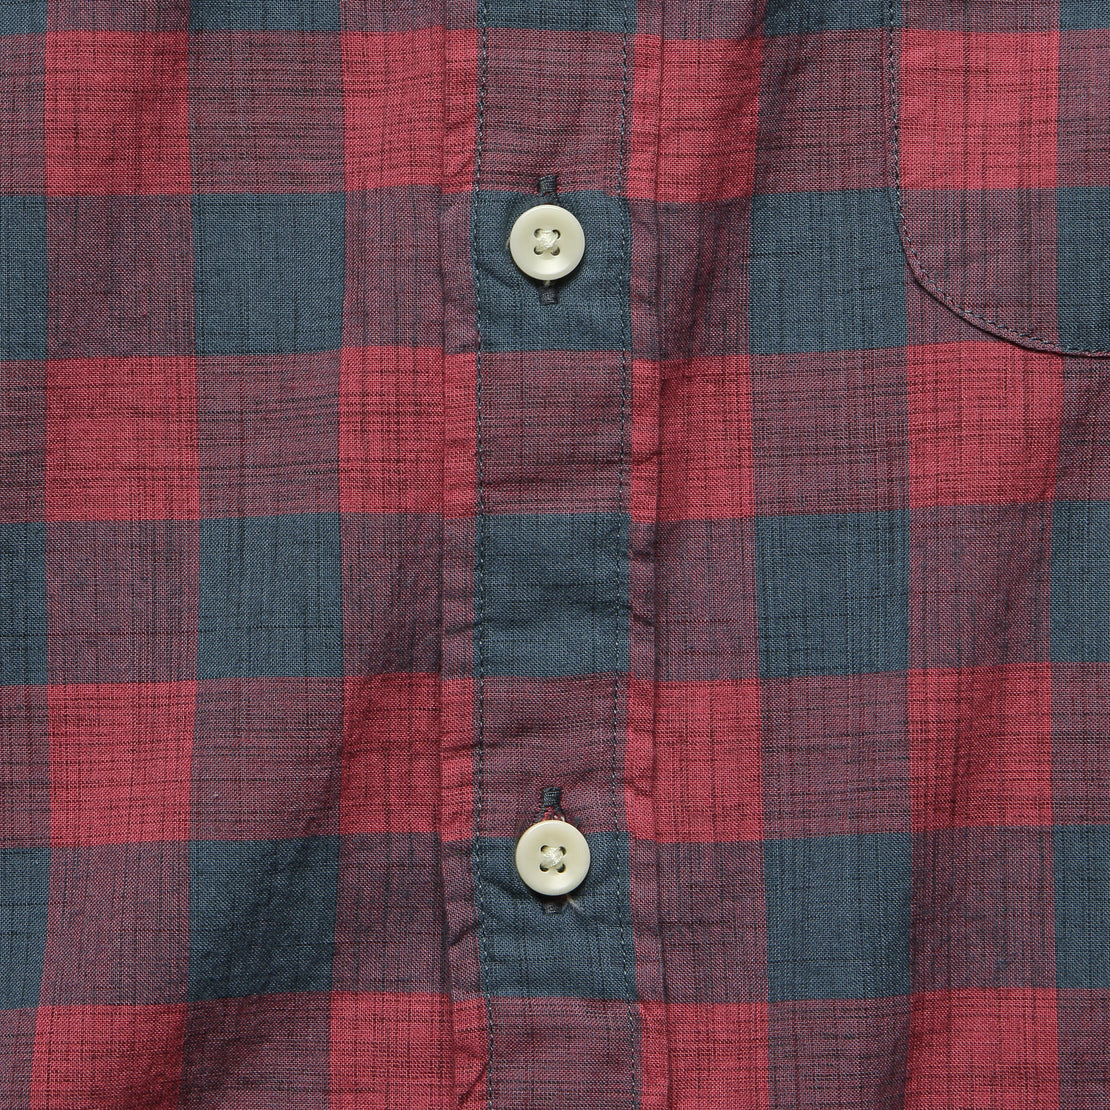 Pacific Shirt - Rose Buffalo Check - Faherty - STAG Provisions - Tops - S/S Woven - Plaid